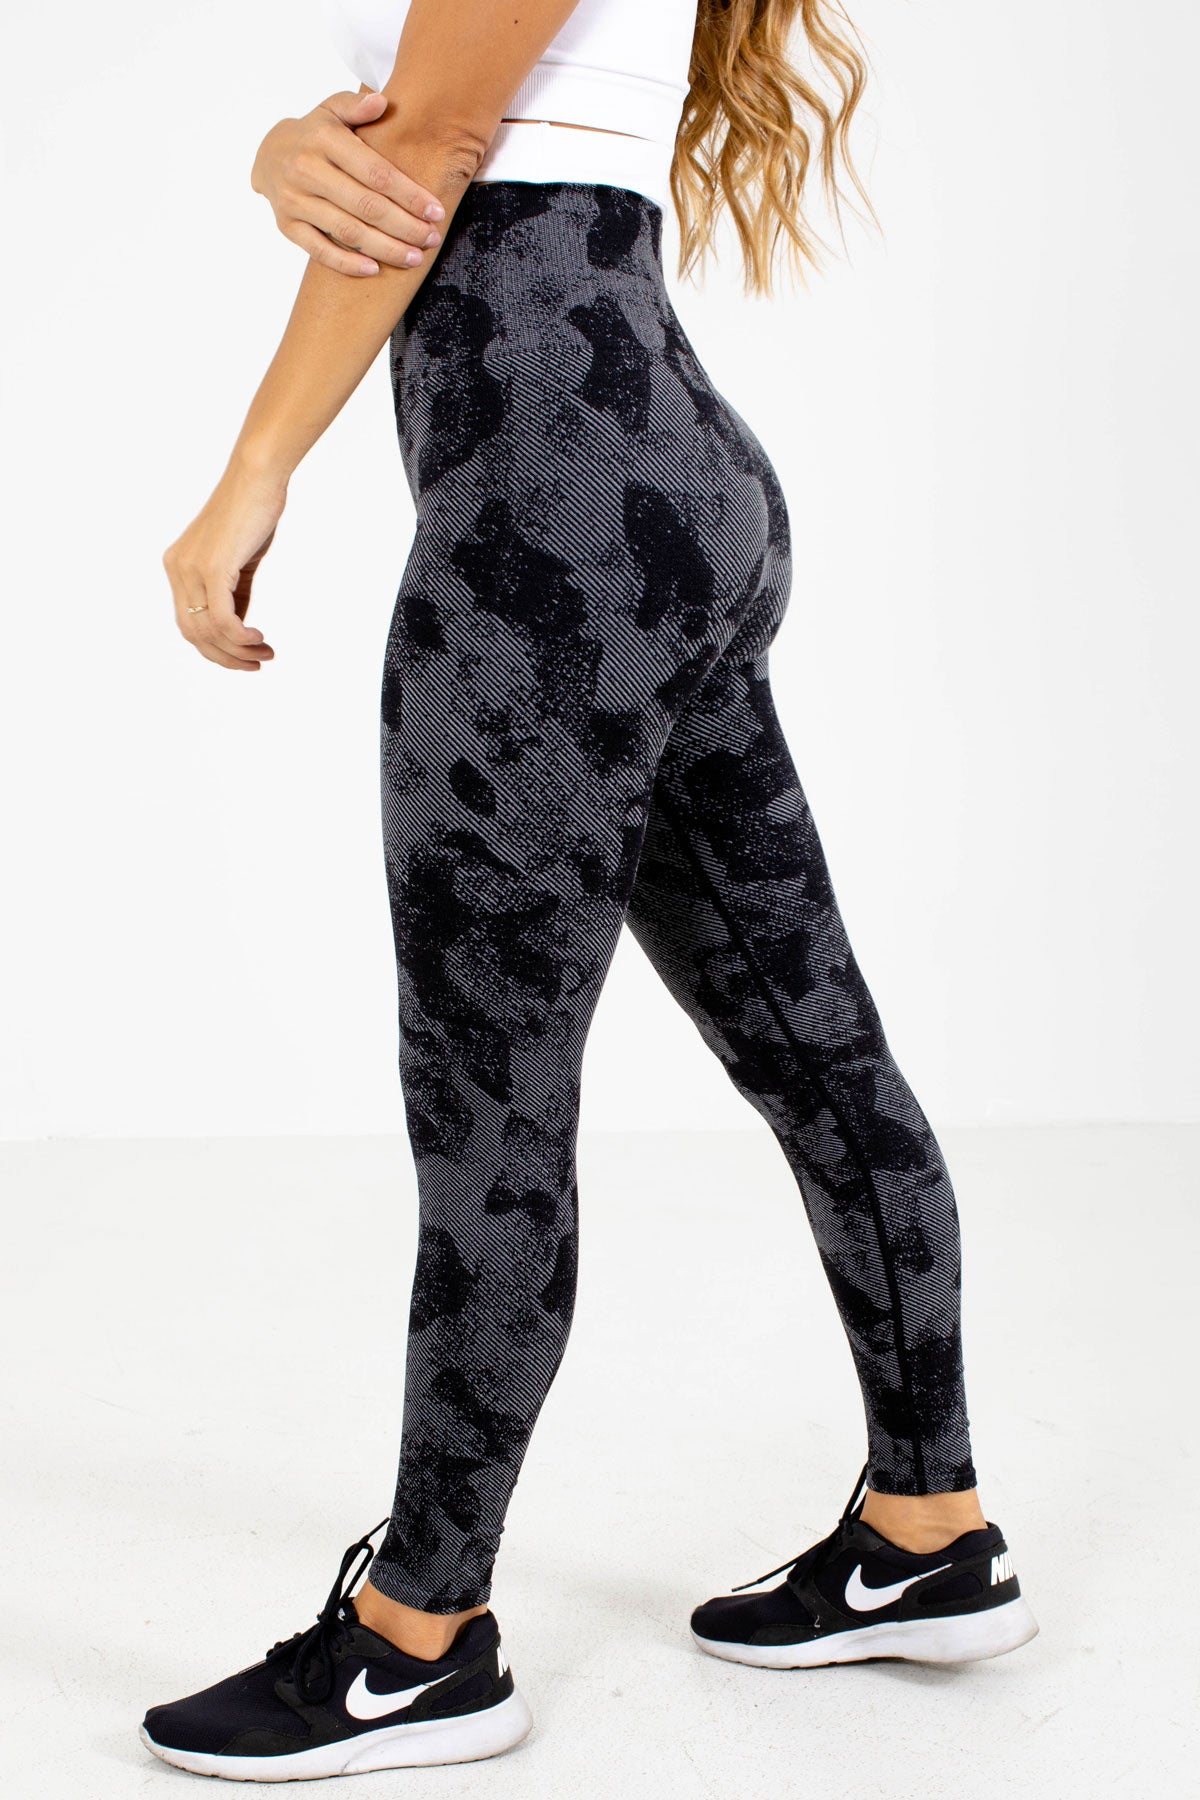 Stay stylish with our Active Camo Print Legging